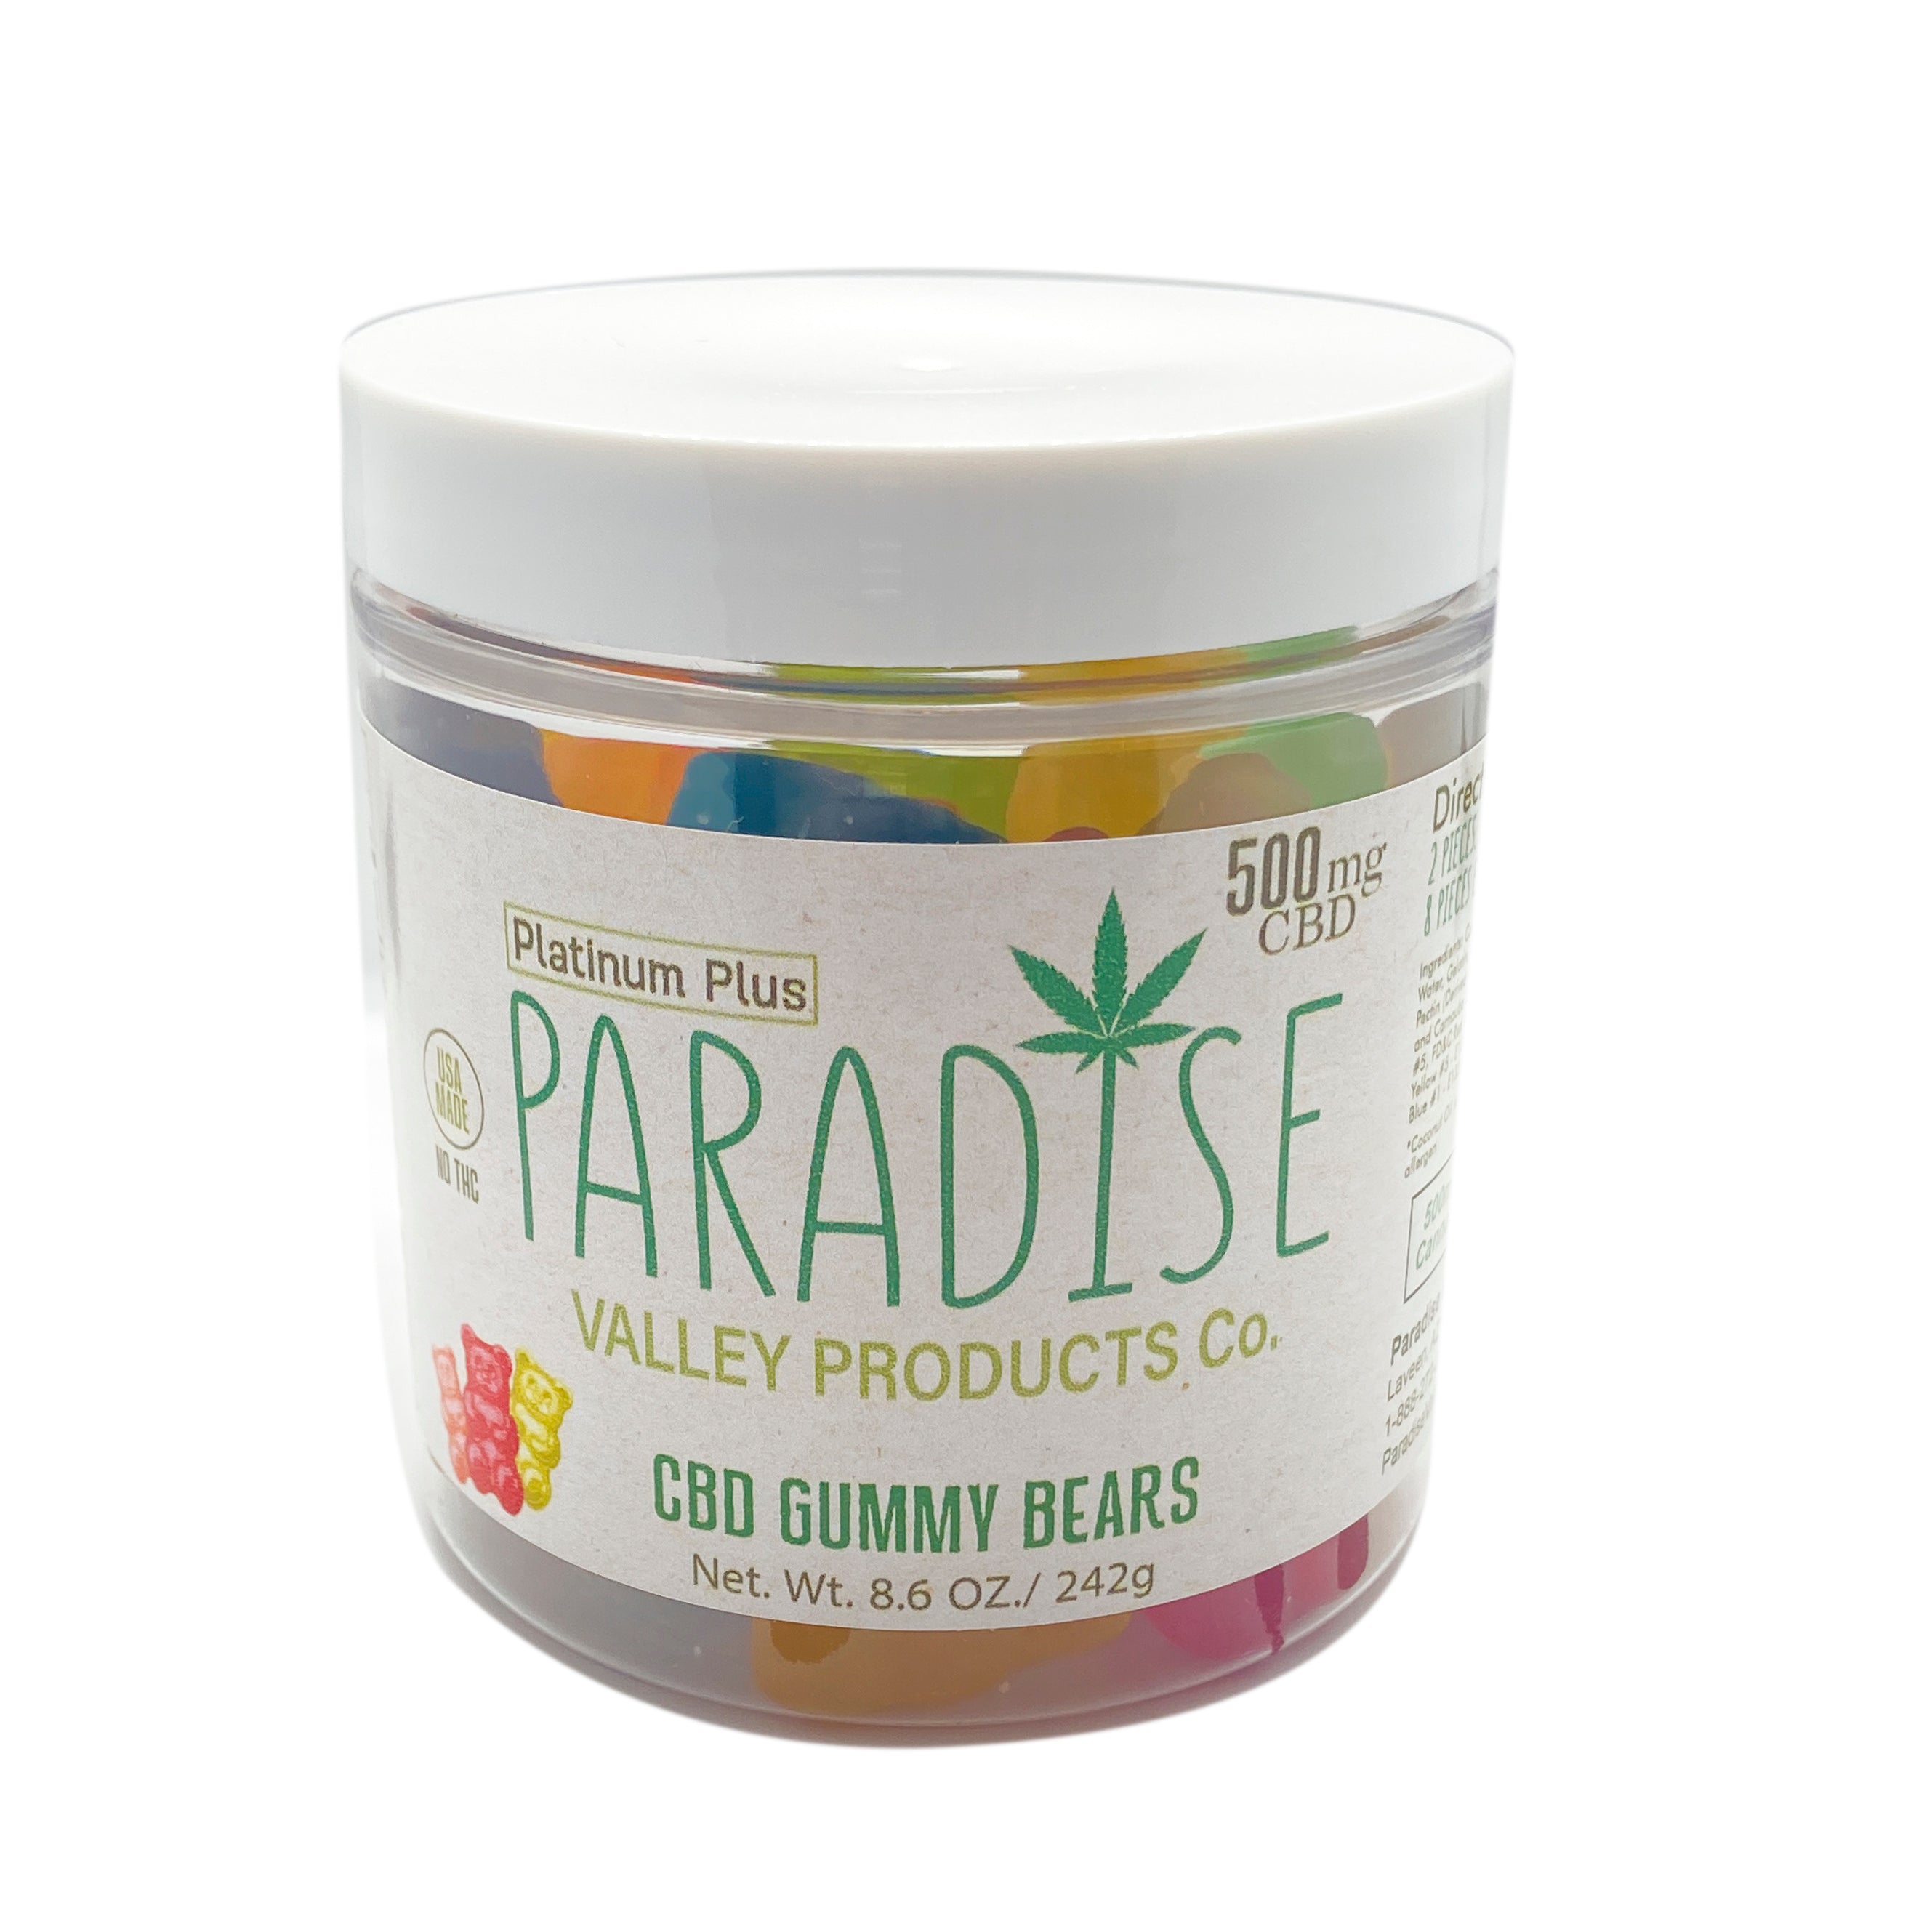 Paradise Valley Products 500mg Platinum Plus CBD Gummy Bears.  Paradise Valley Products CBD Gummy Bears online are the best and taste yummy.  Cheap CBD hemp oil.